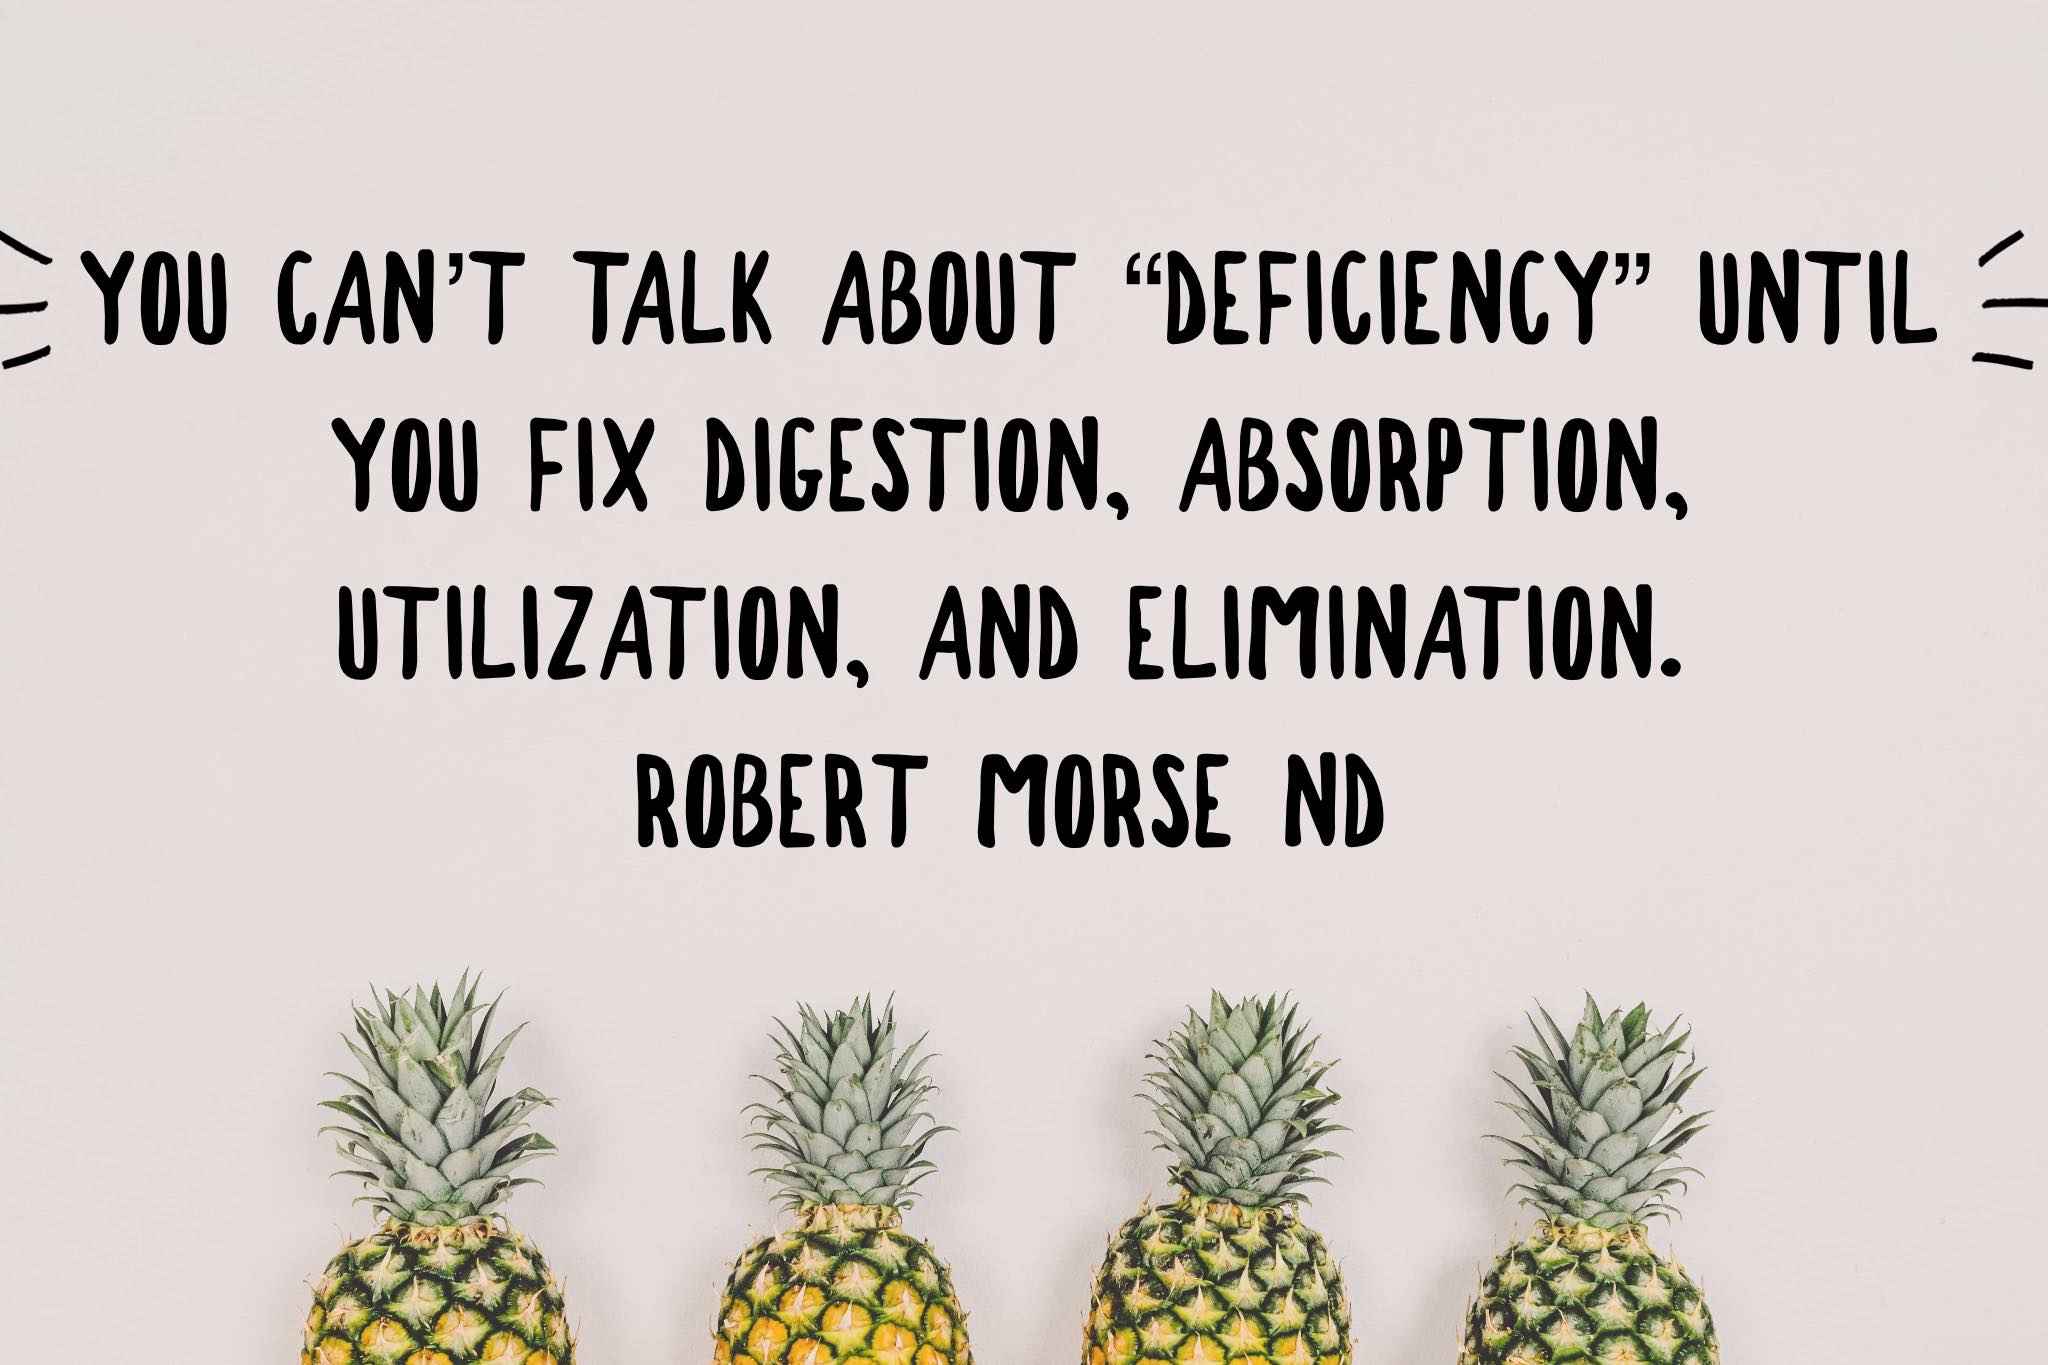 You will be told it’s “deficiency”